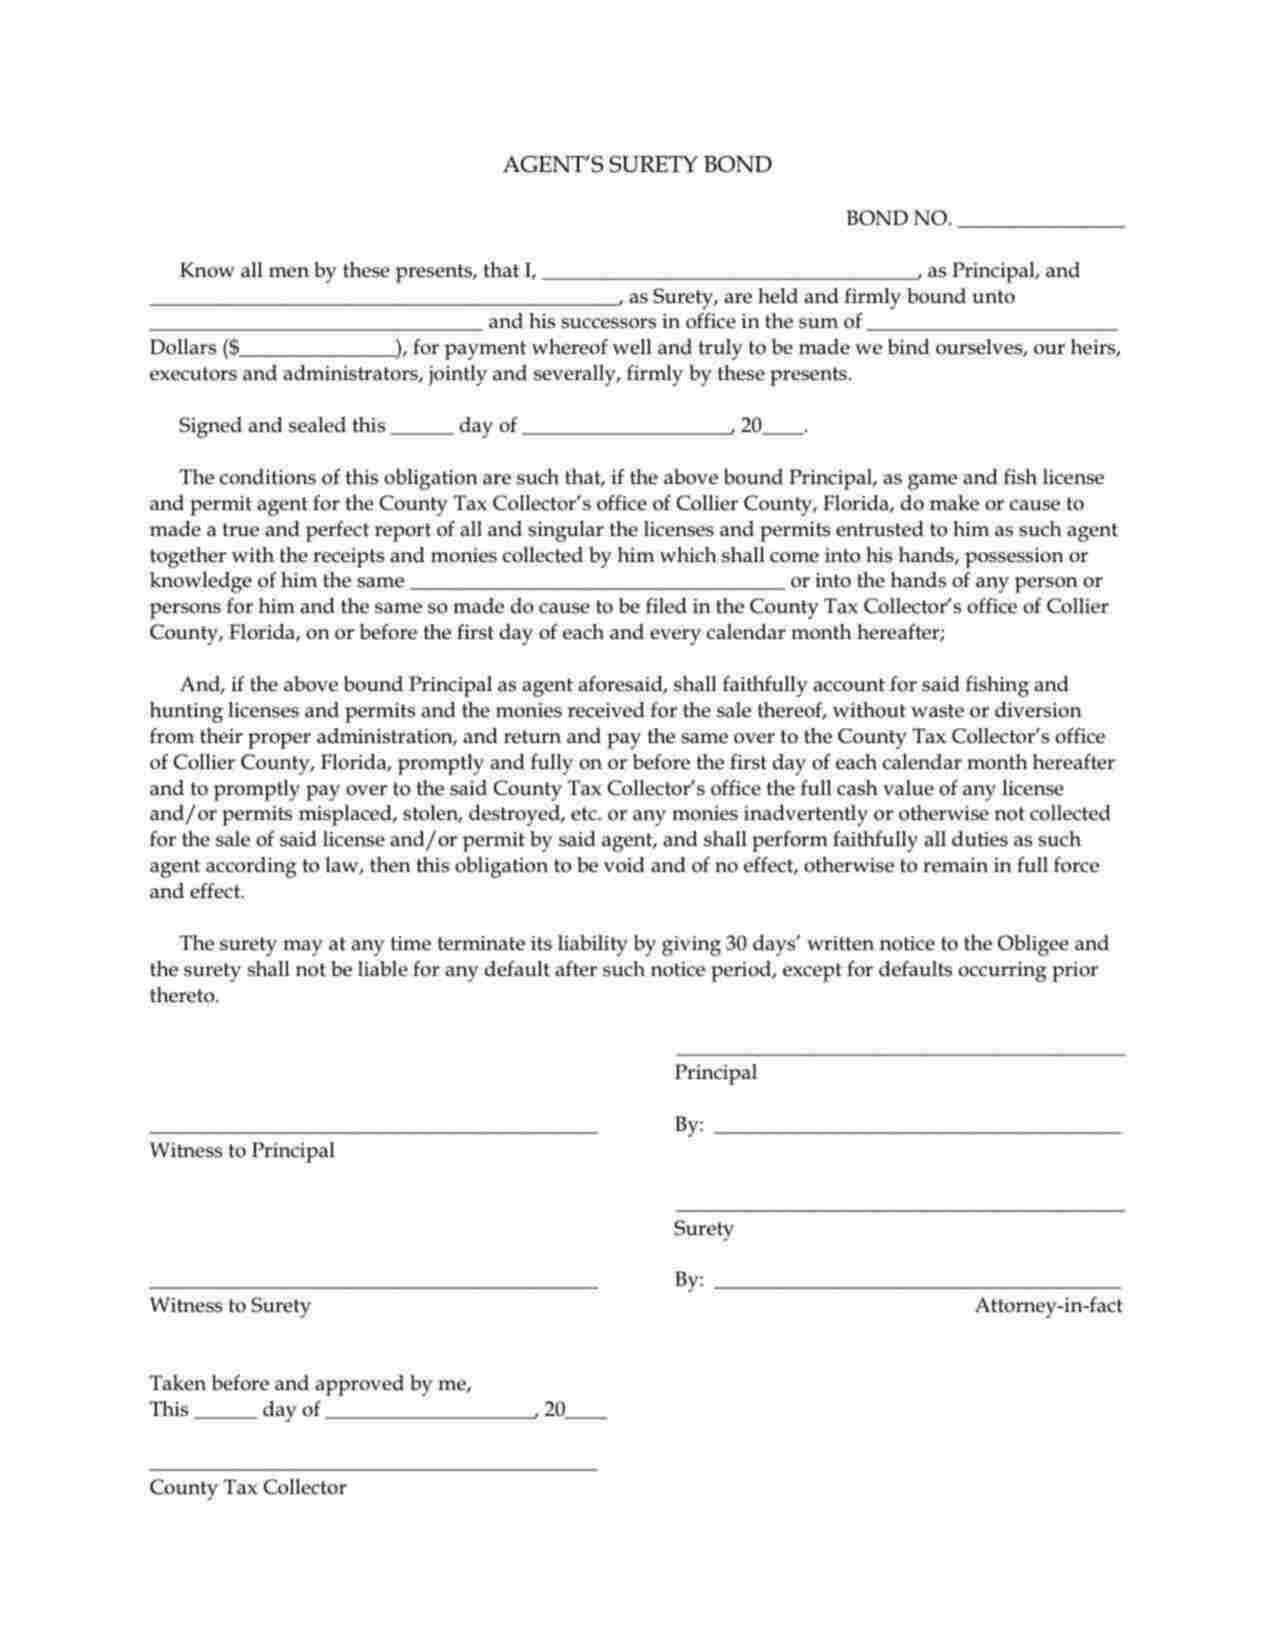 Florida Game and Fish License and Permit Agent Bond Form